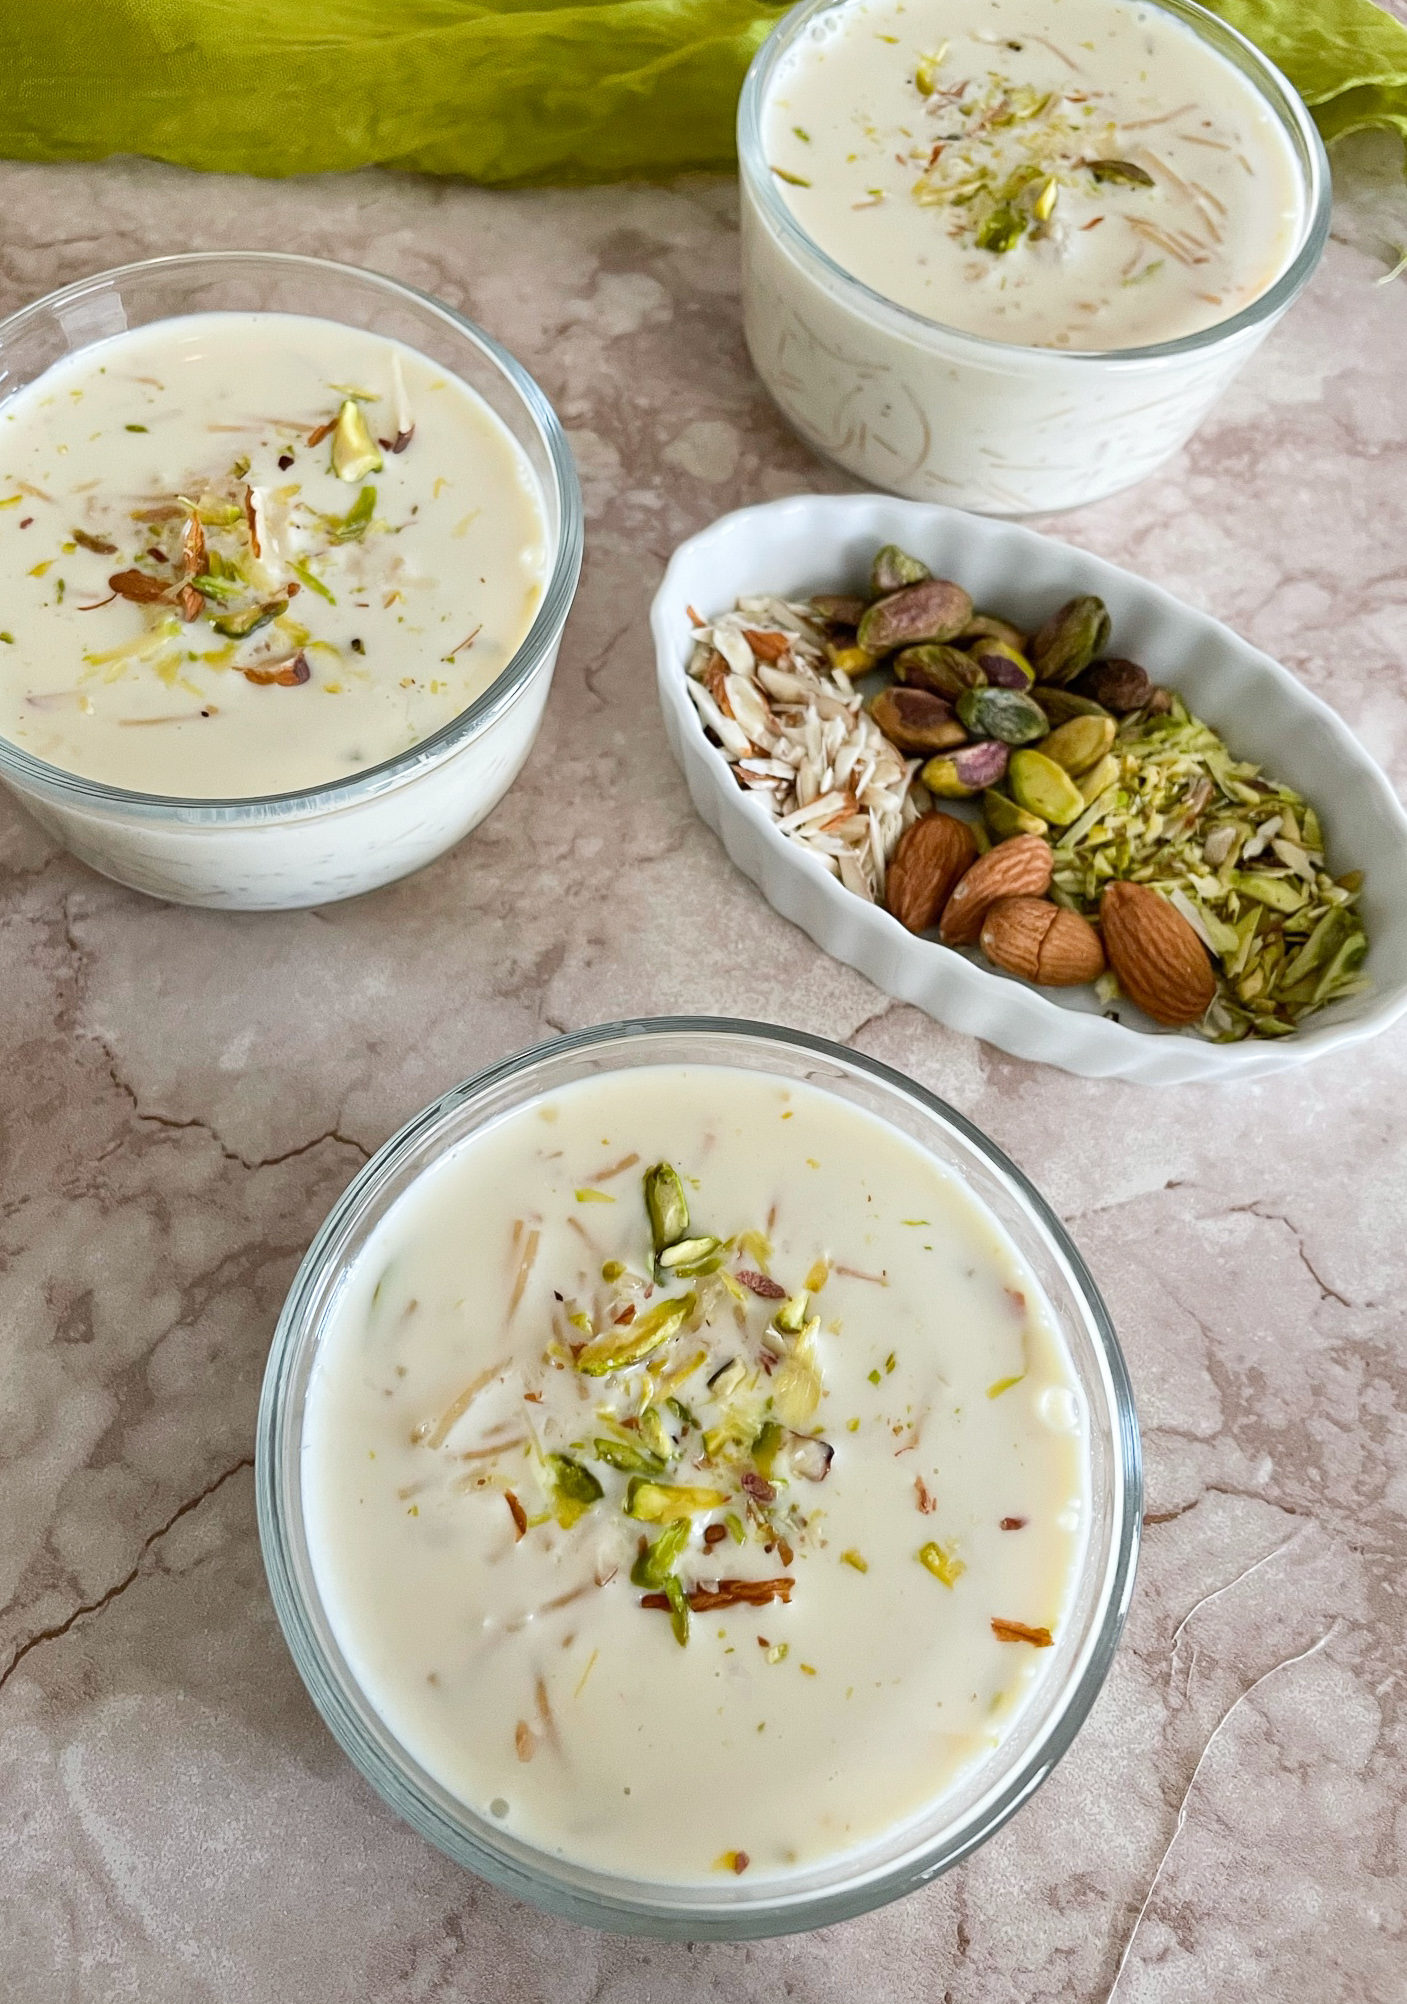 Sheer Khurma: Vermicelli Pudding for Eid